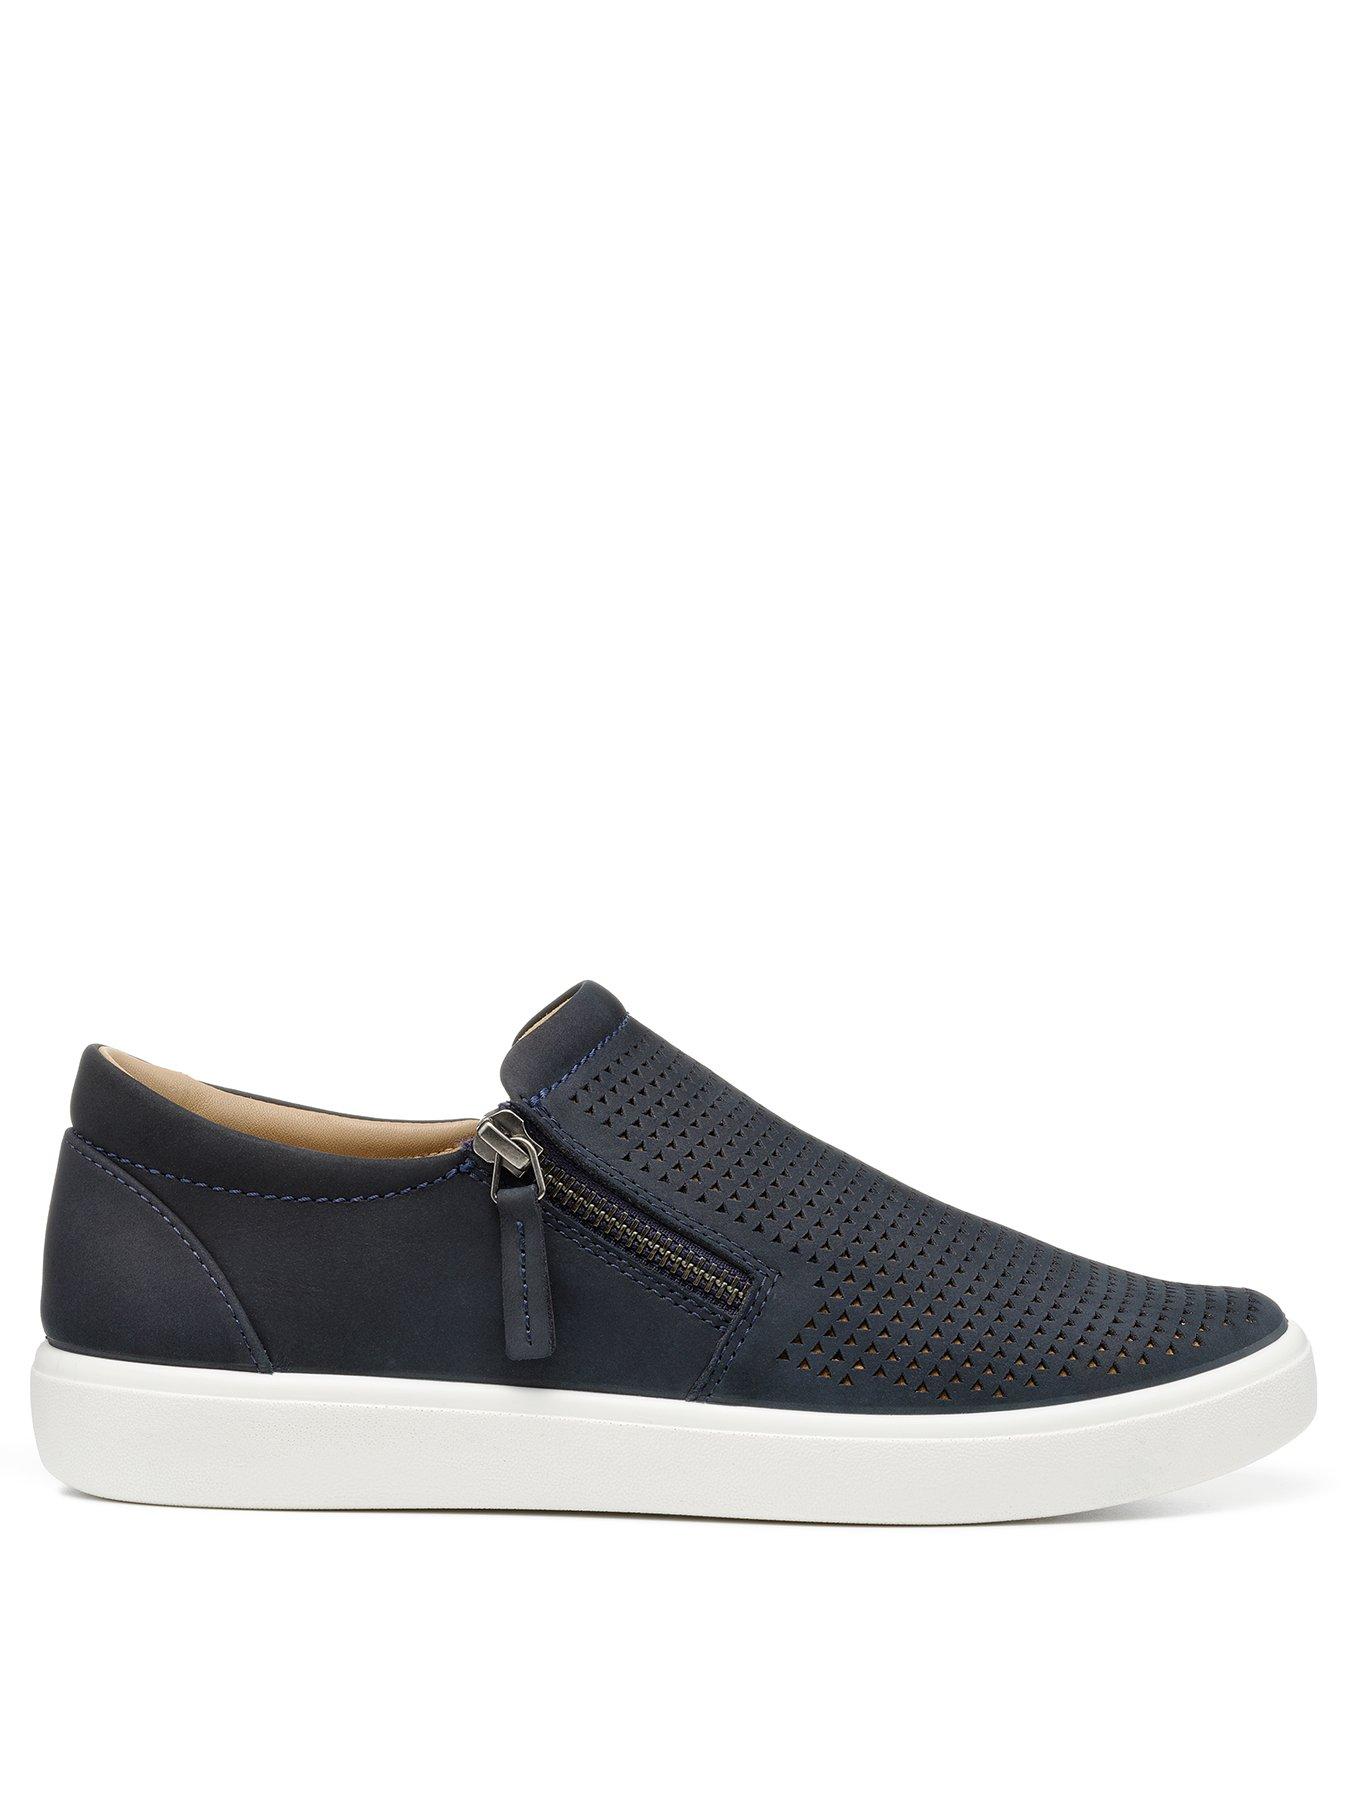 Hotter Daisy Extra Wide Fit Plimsoll - Navy | very.co.uk